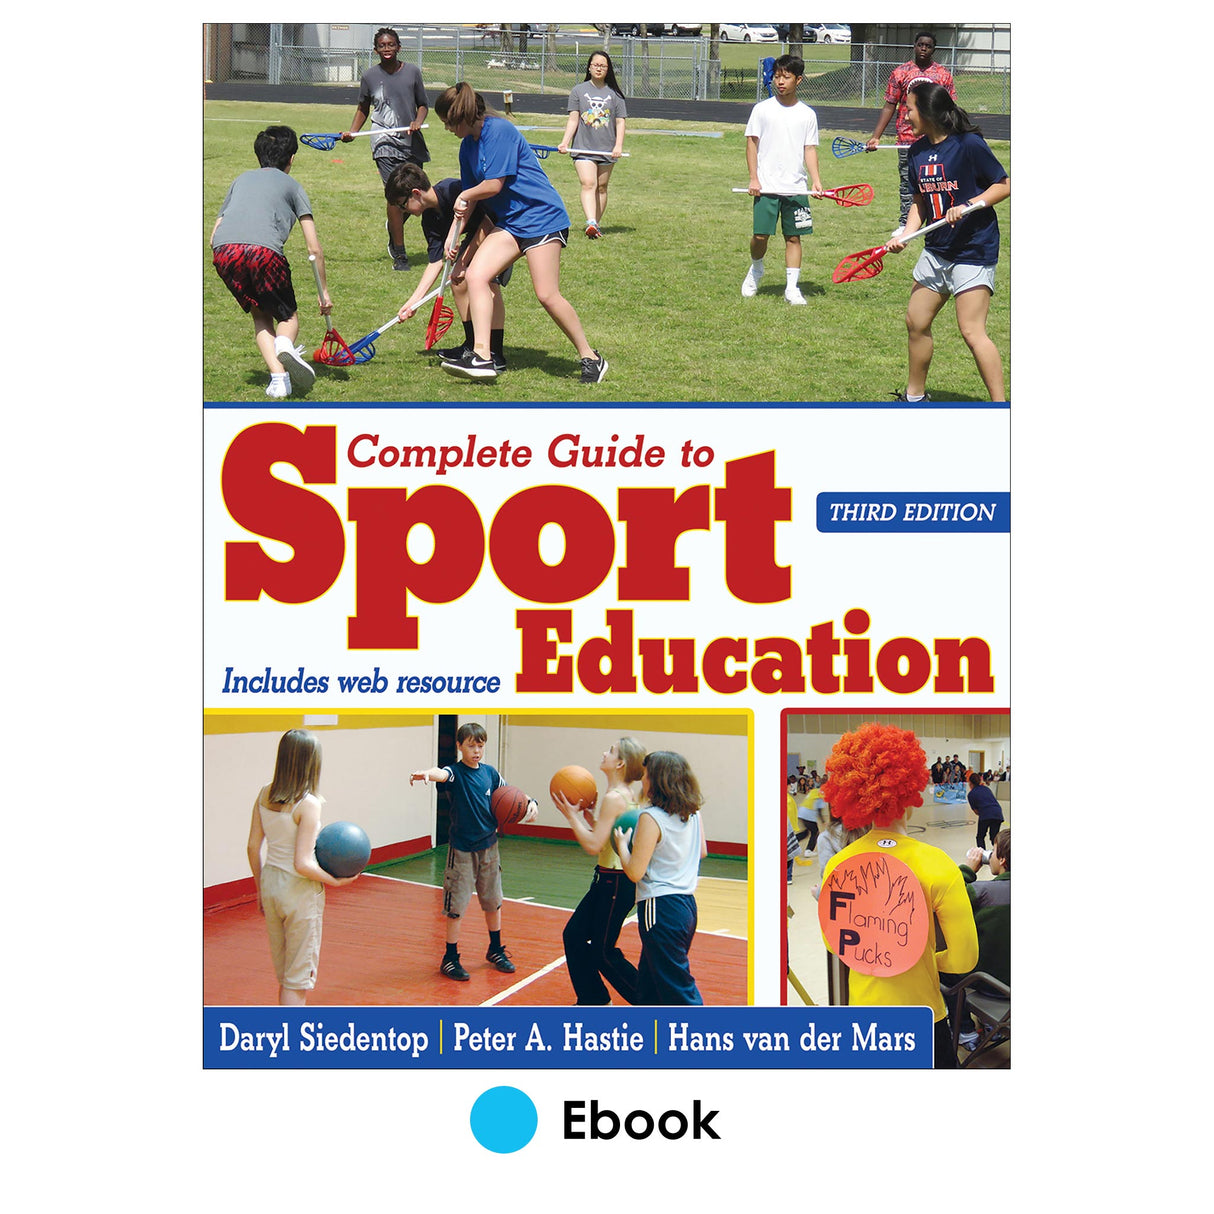 Complete Guide to Sport Education 3rd Edition epub With Web Resource